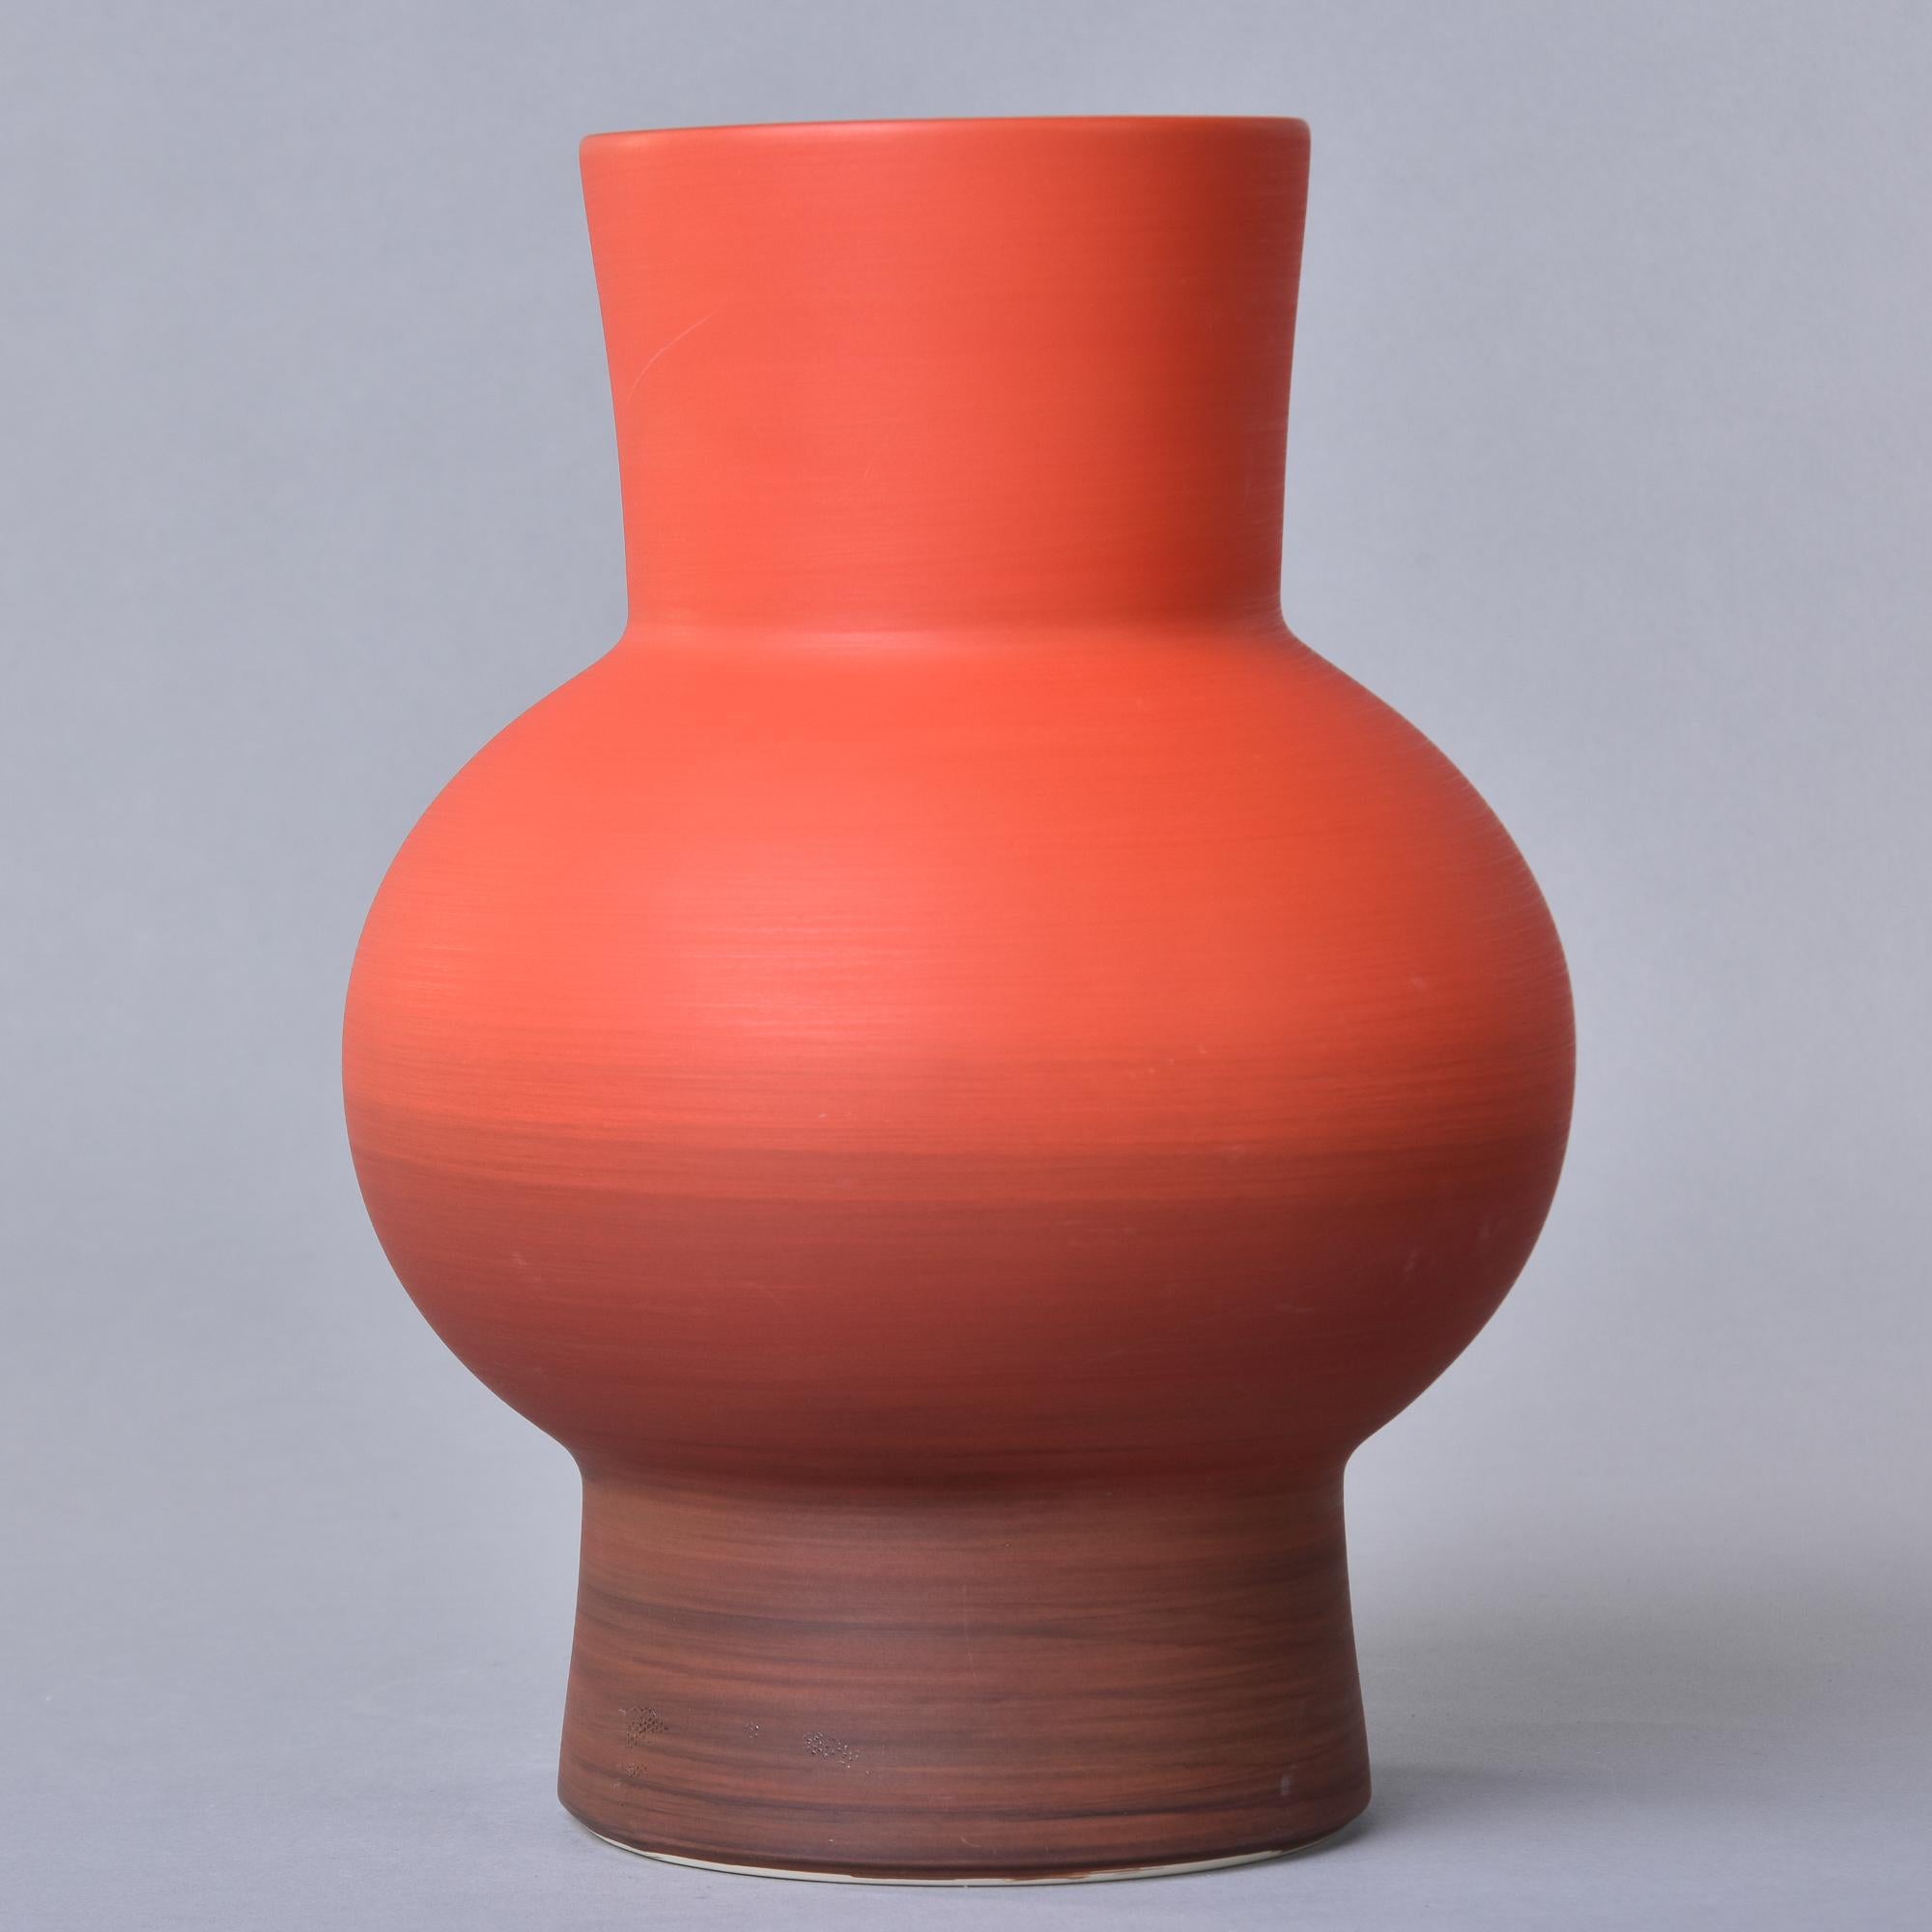 New and made in Italy by Rina Menardi, this thin-walled vase stands over 12” high and has a pleasing shape. The ombre-style poppy red colored glaze has a contrasting dark washed interior. Signed on underside of base. New with no flaws found. Other